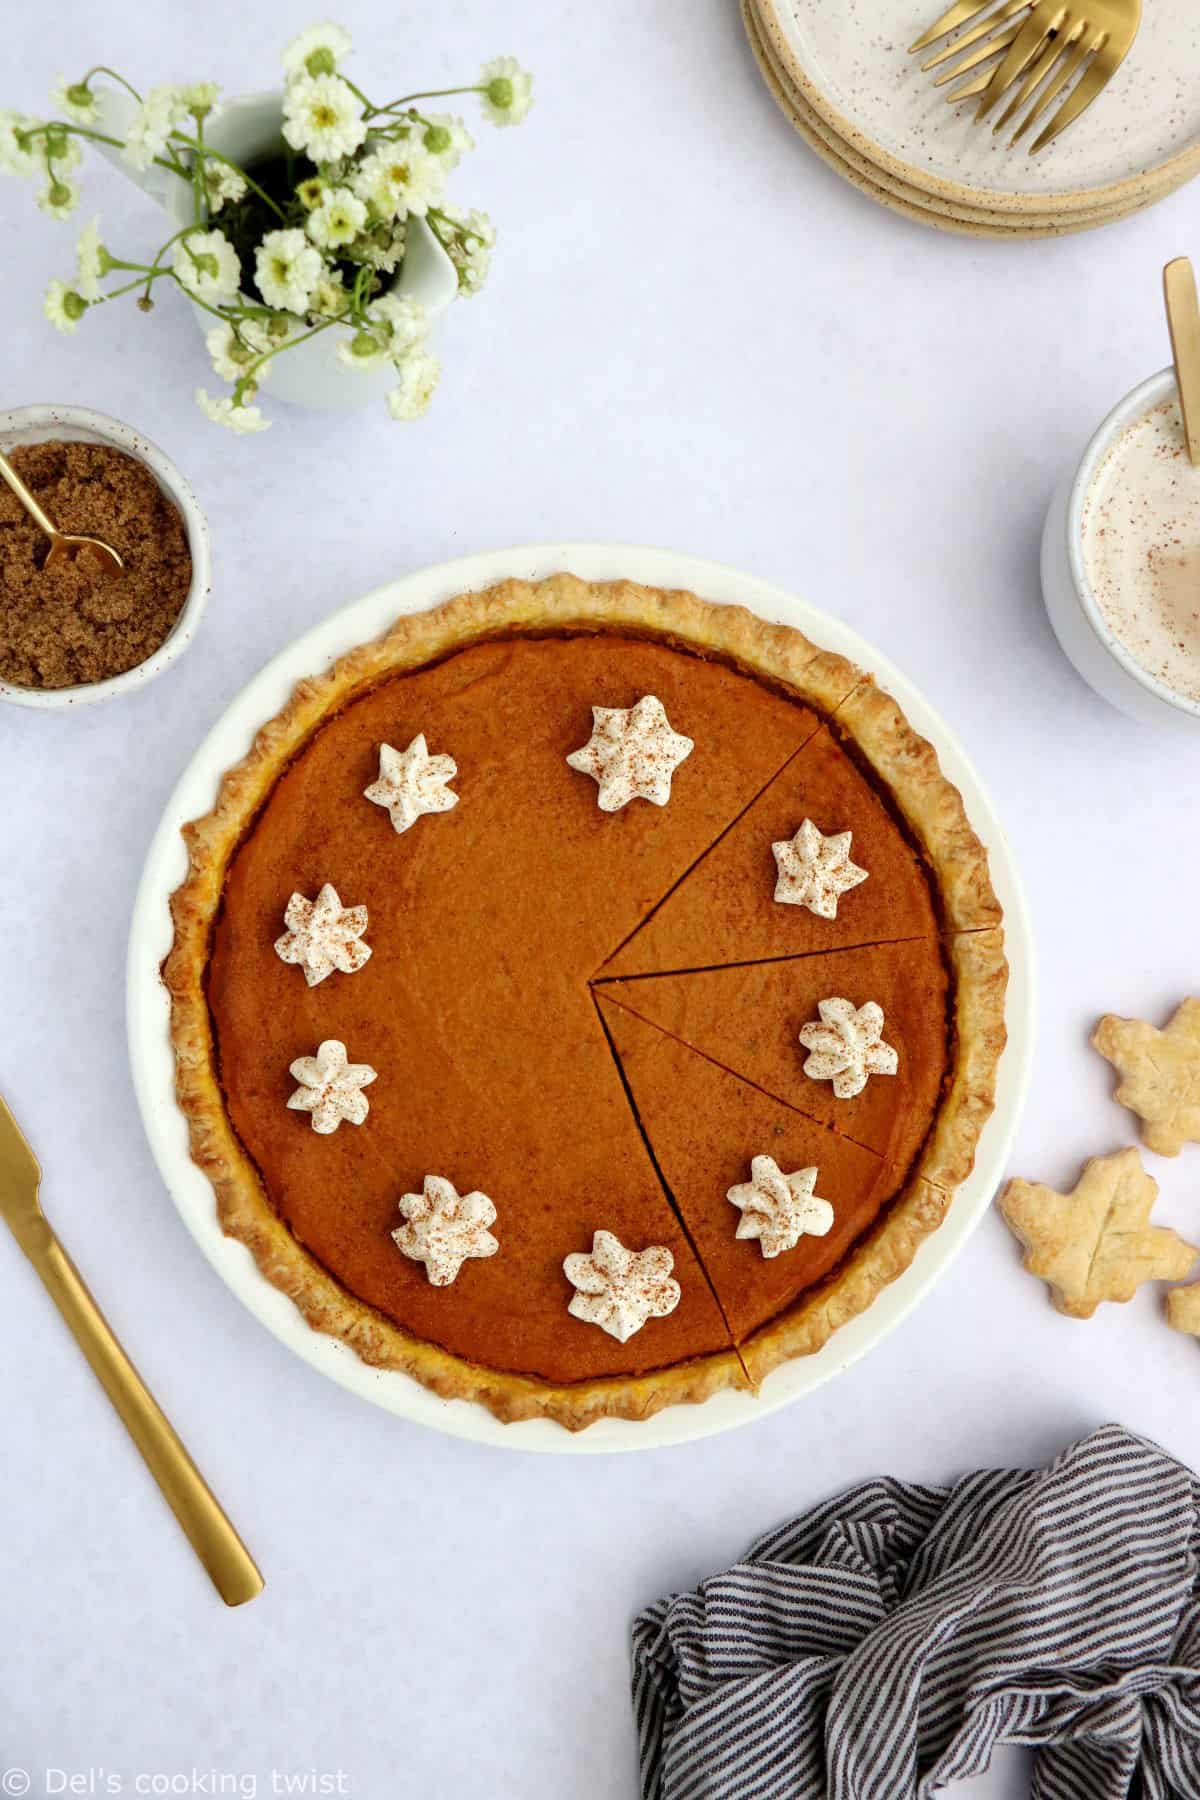 The old fashioned sweet potato pie is a classic dessert to enjoy during the fall months and a great alternative to pumpkin pie for Thanksgiving.